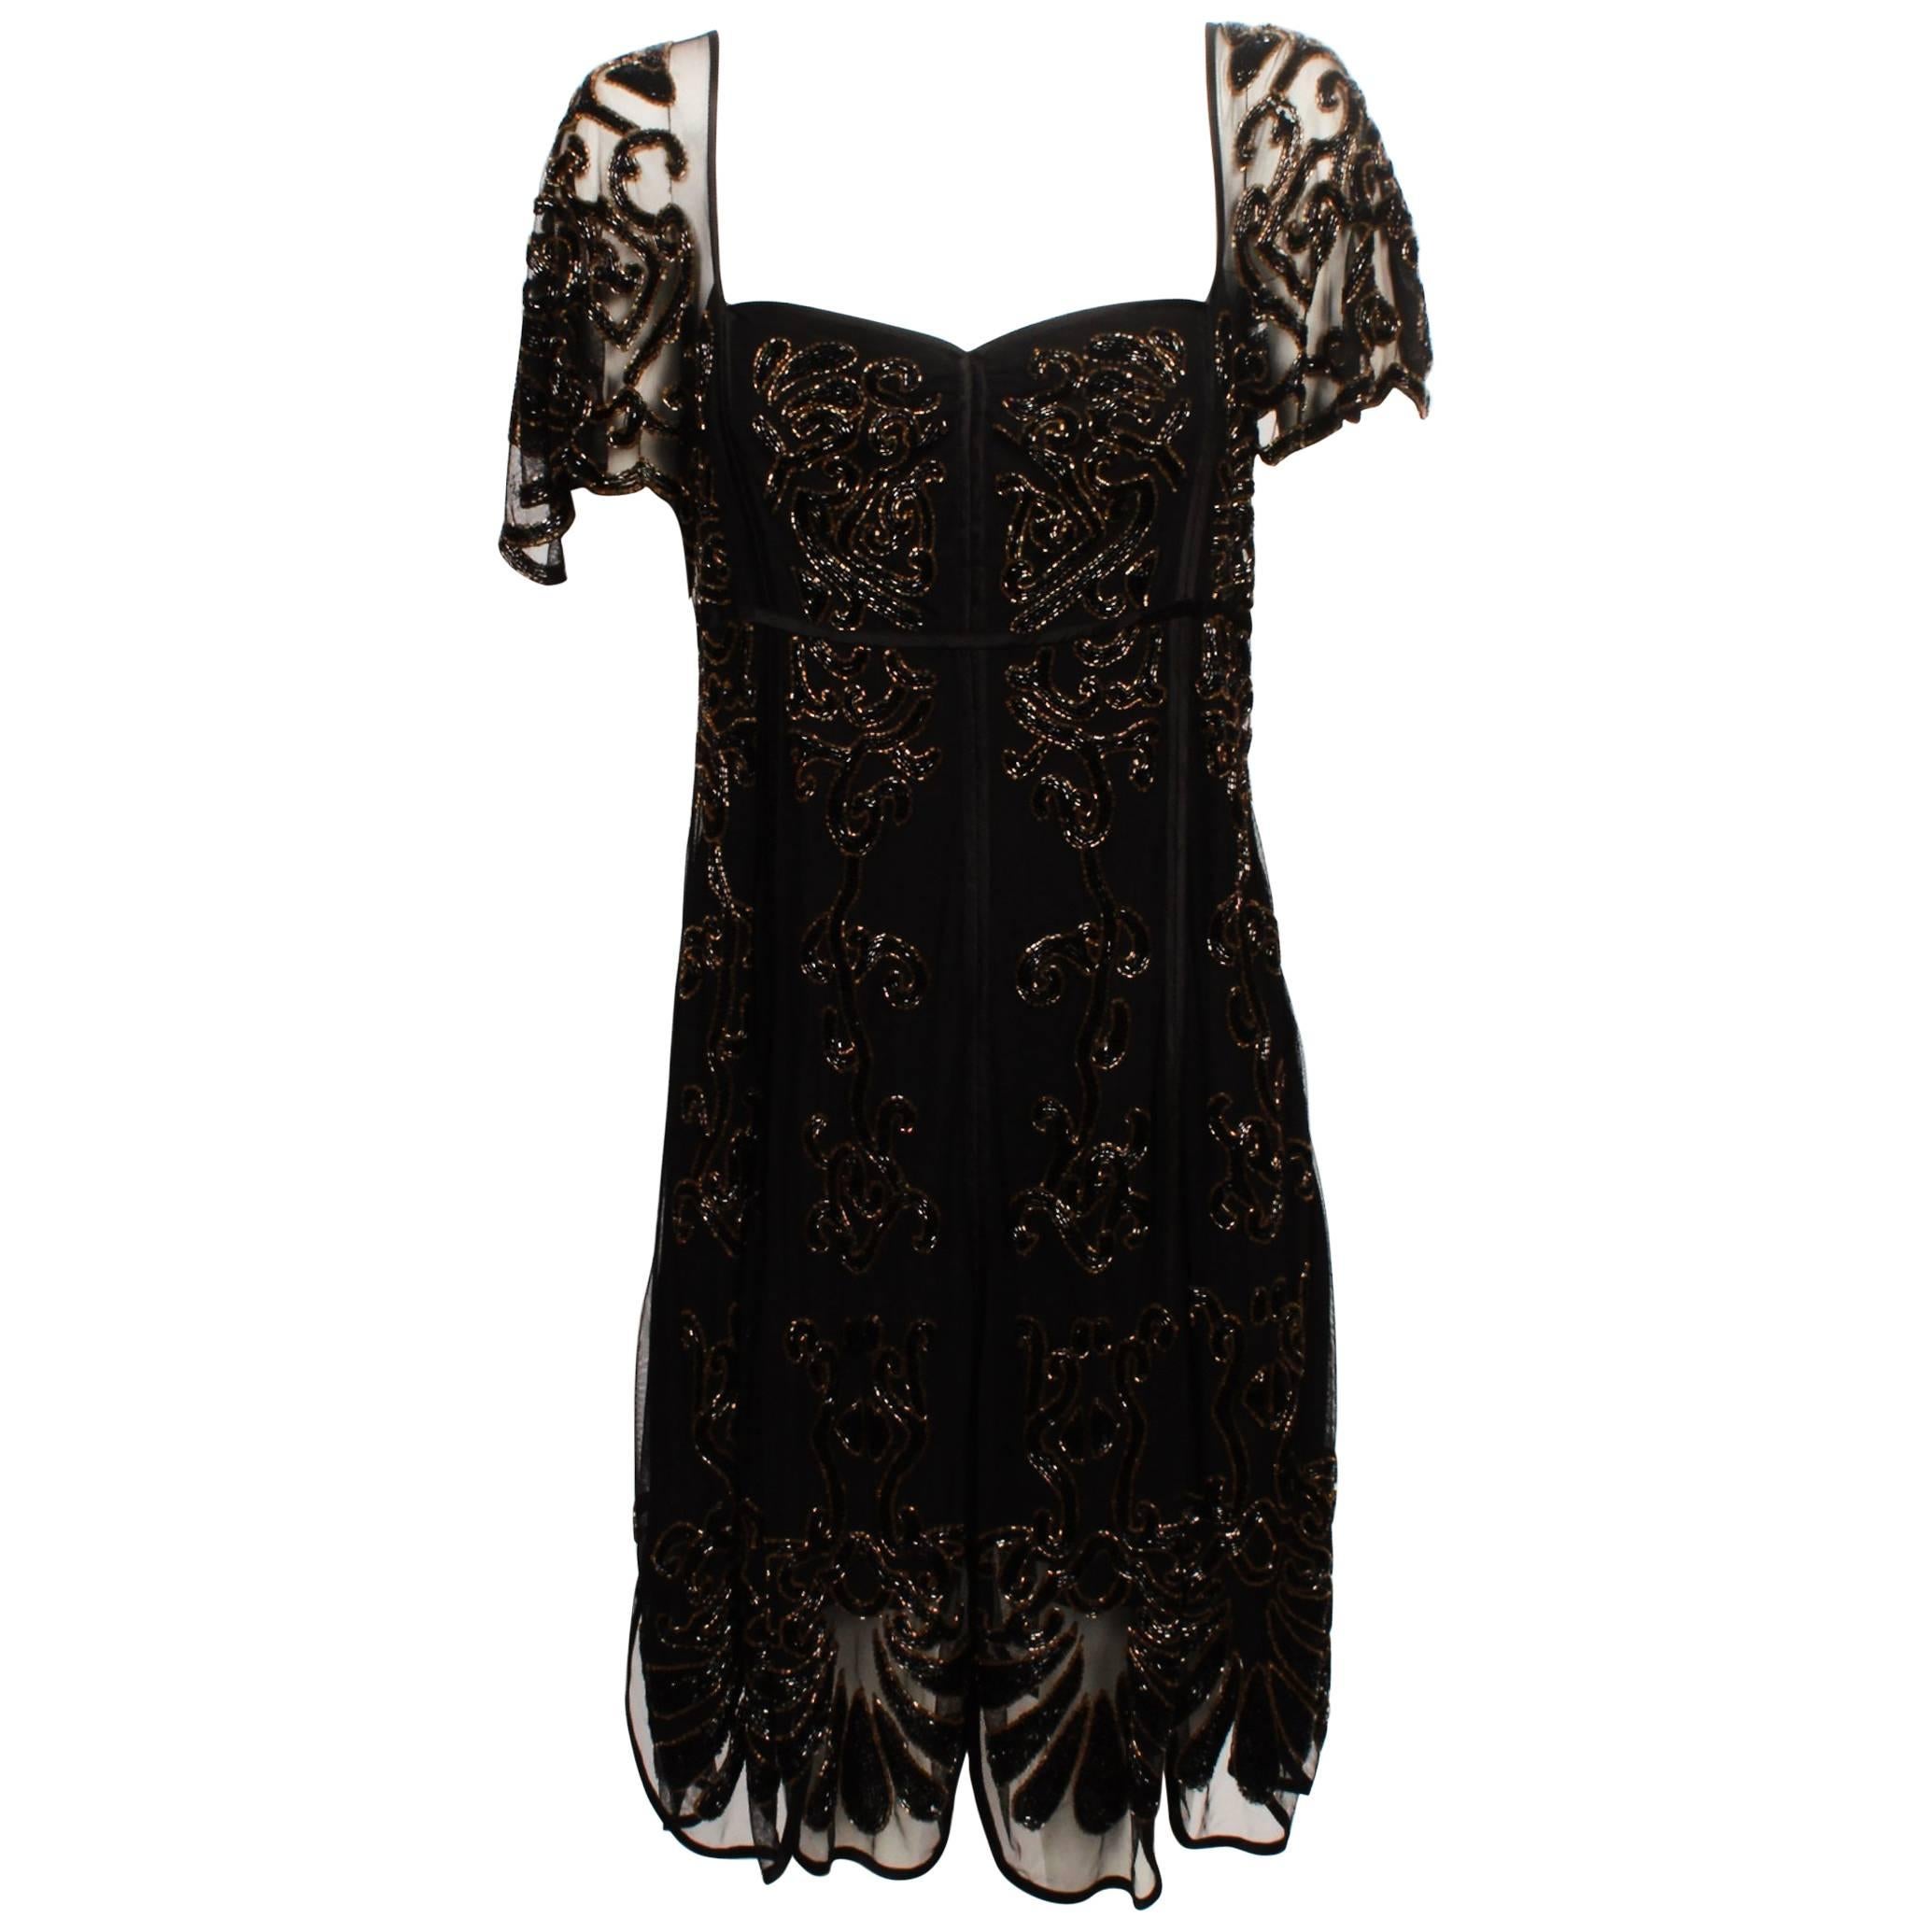 Temperely London 1920's Style Beaded Veil Cocktail Dress